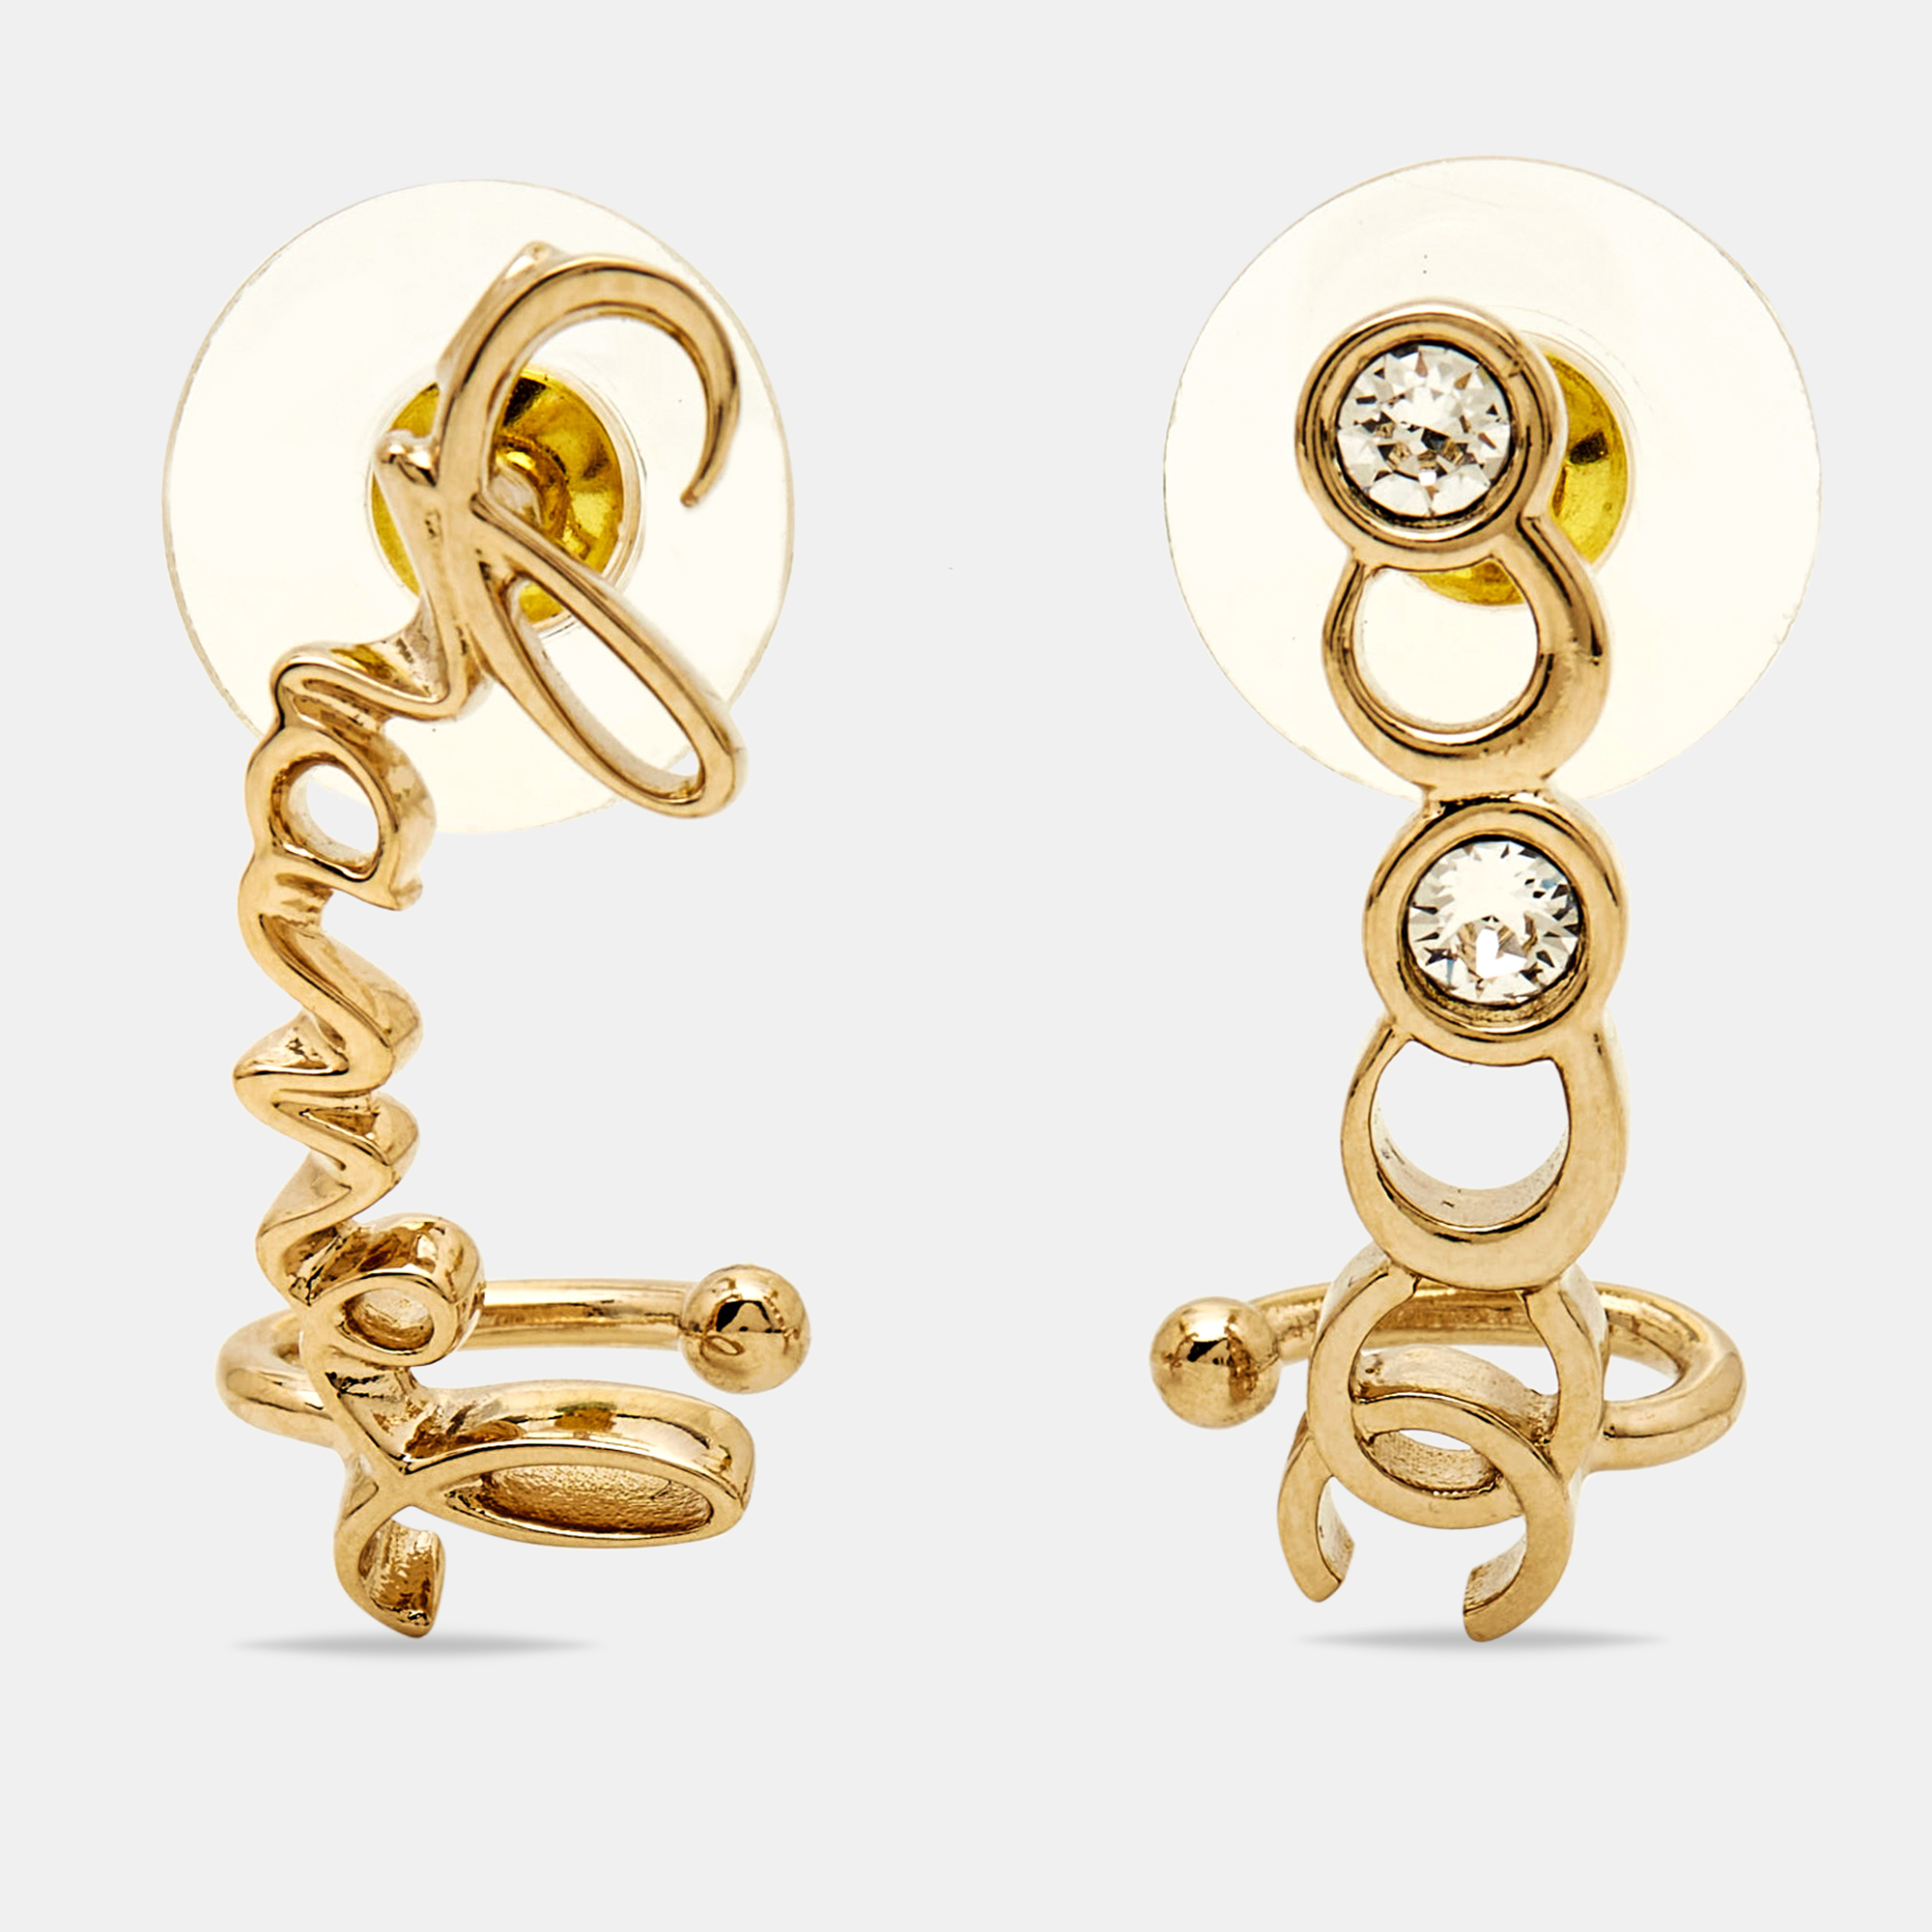 Chanel Coco Script Crystal Gold Tone Climber Earrings